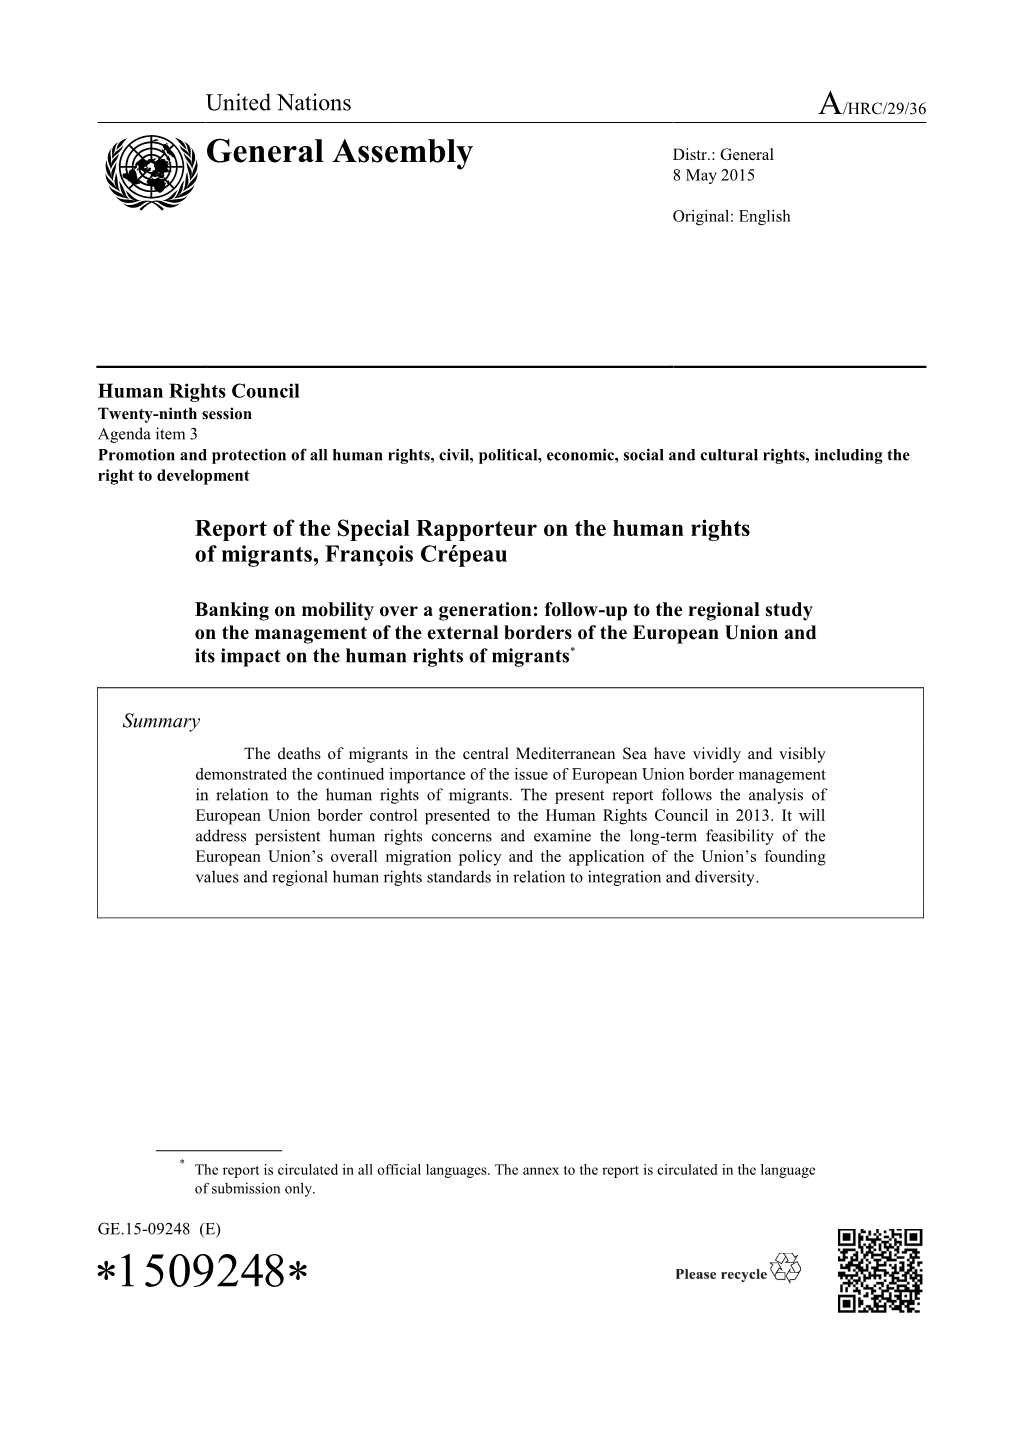 Report of the Special Rapporteur on the Human Rights of Migrants in English